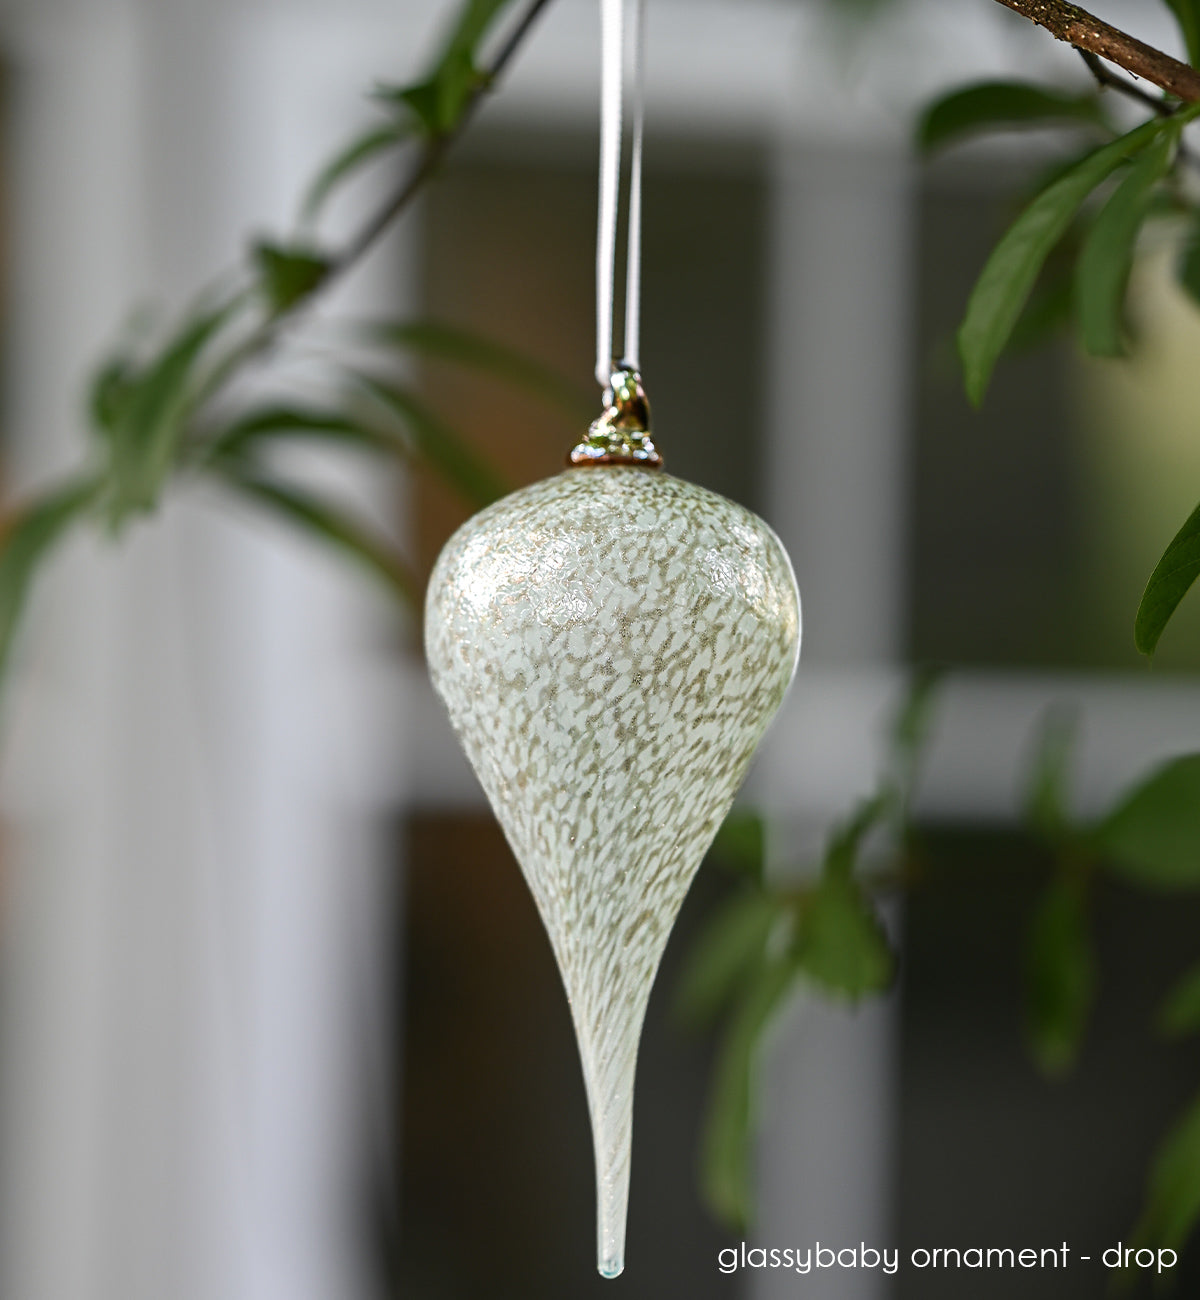 every handblown glassybaby ornament is unique and a perfect addition to your holiday decor and christmas tree at home.